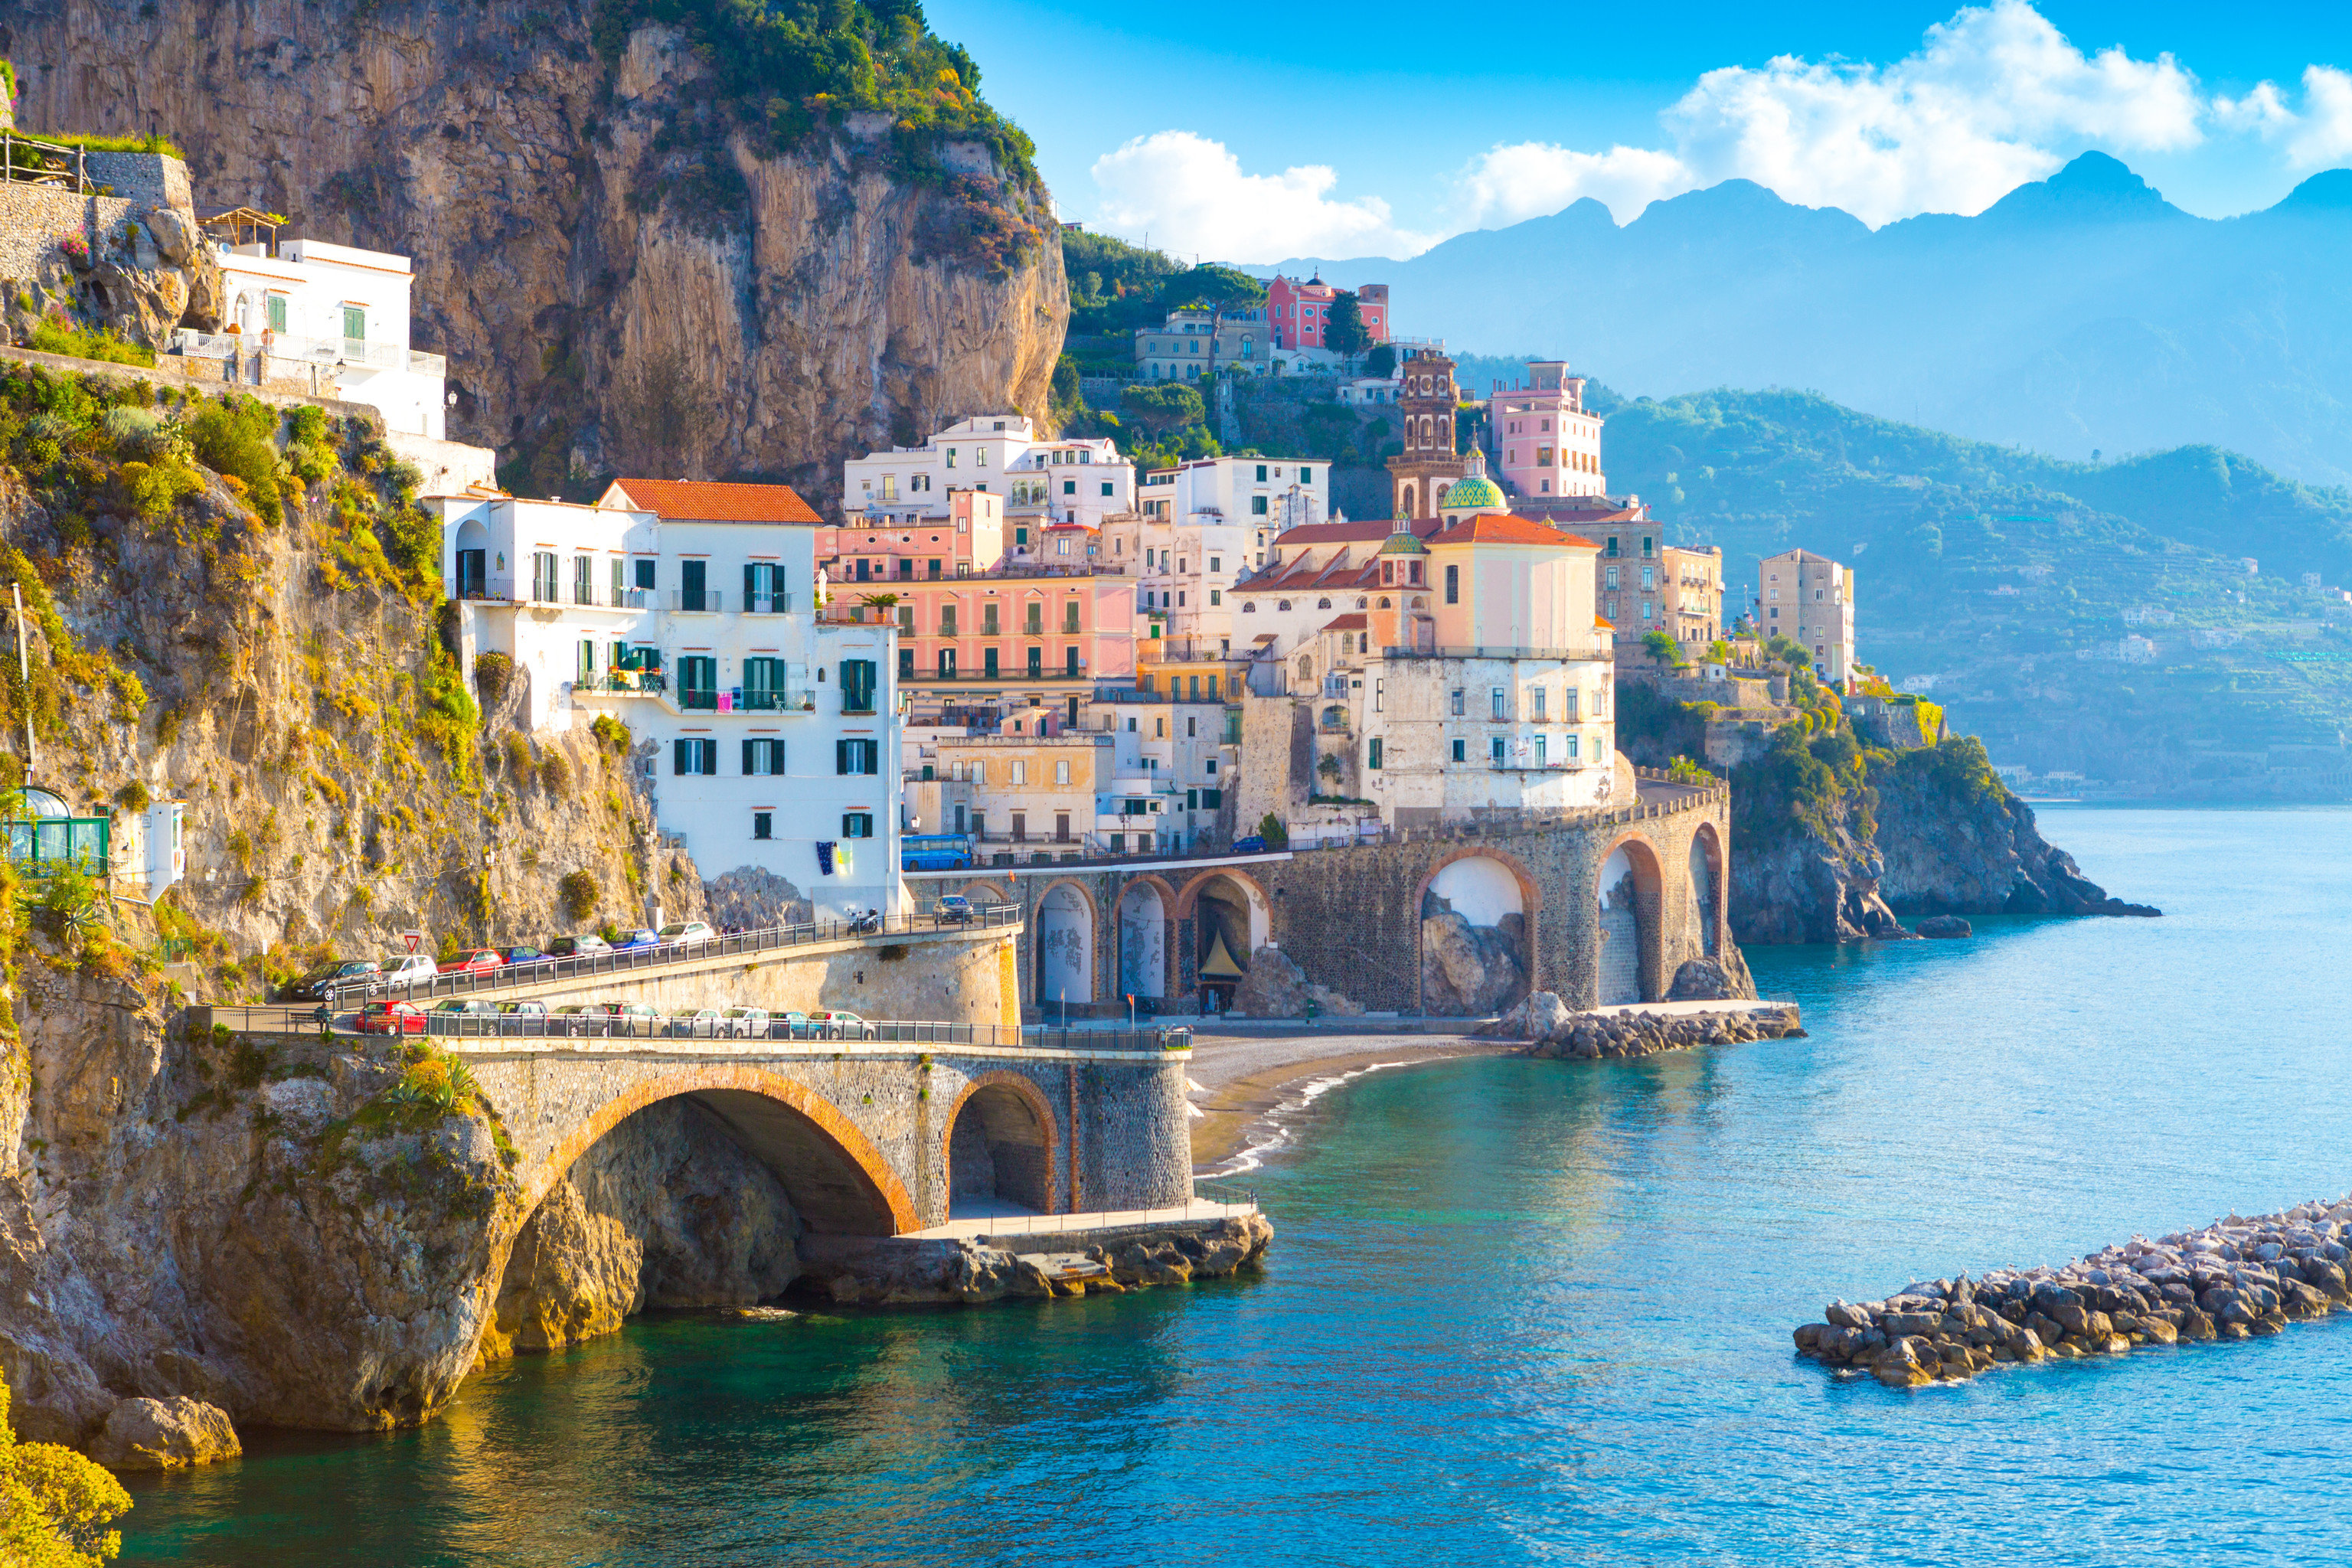 nedenunder ubehag Manners How to Do Italy's Amalfi Coast on a Budget - Jetsetter